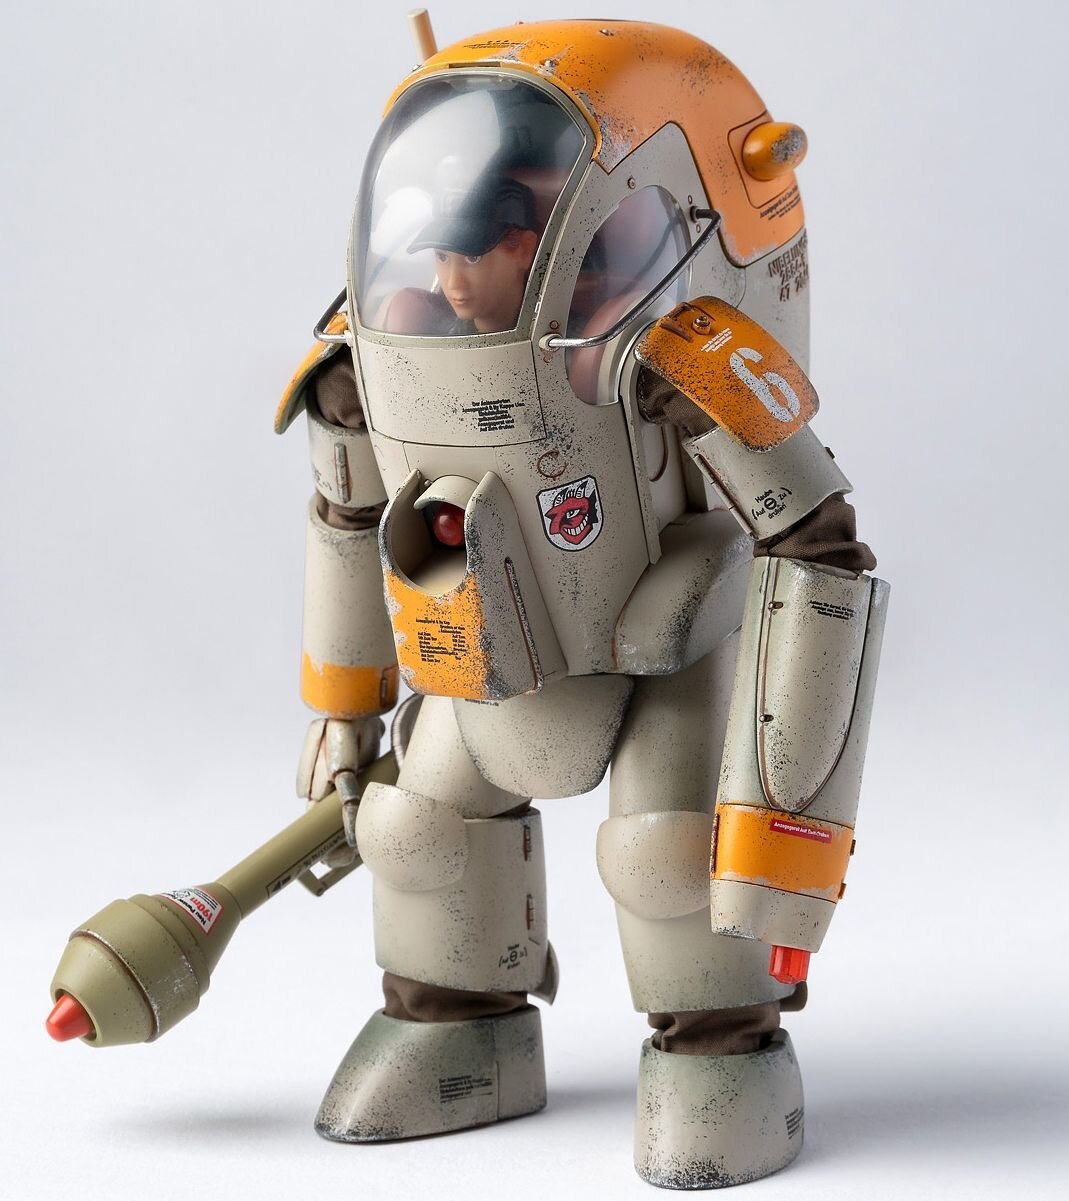 Ma.K 1/16 GUSTAV Toy Action Figure Pre-Order is UP!! — Paint on